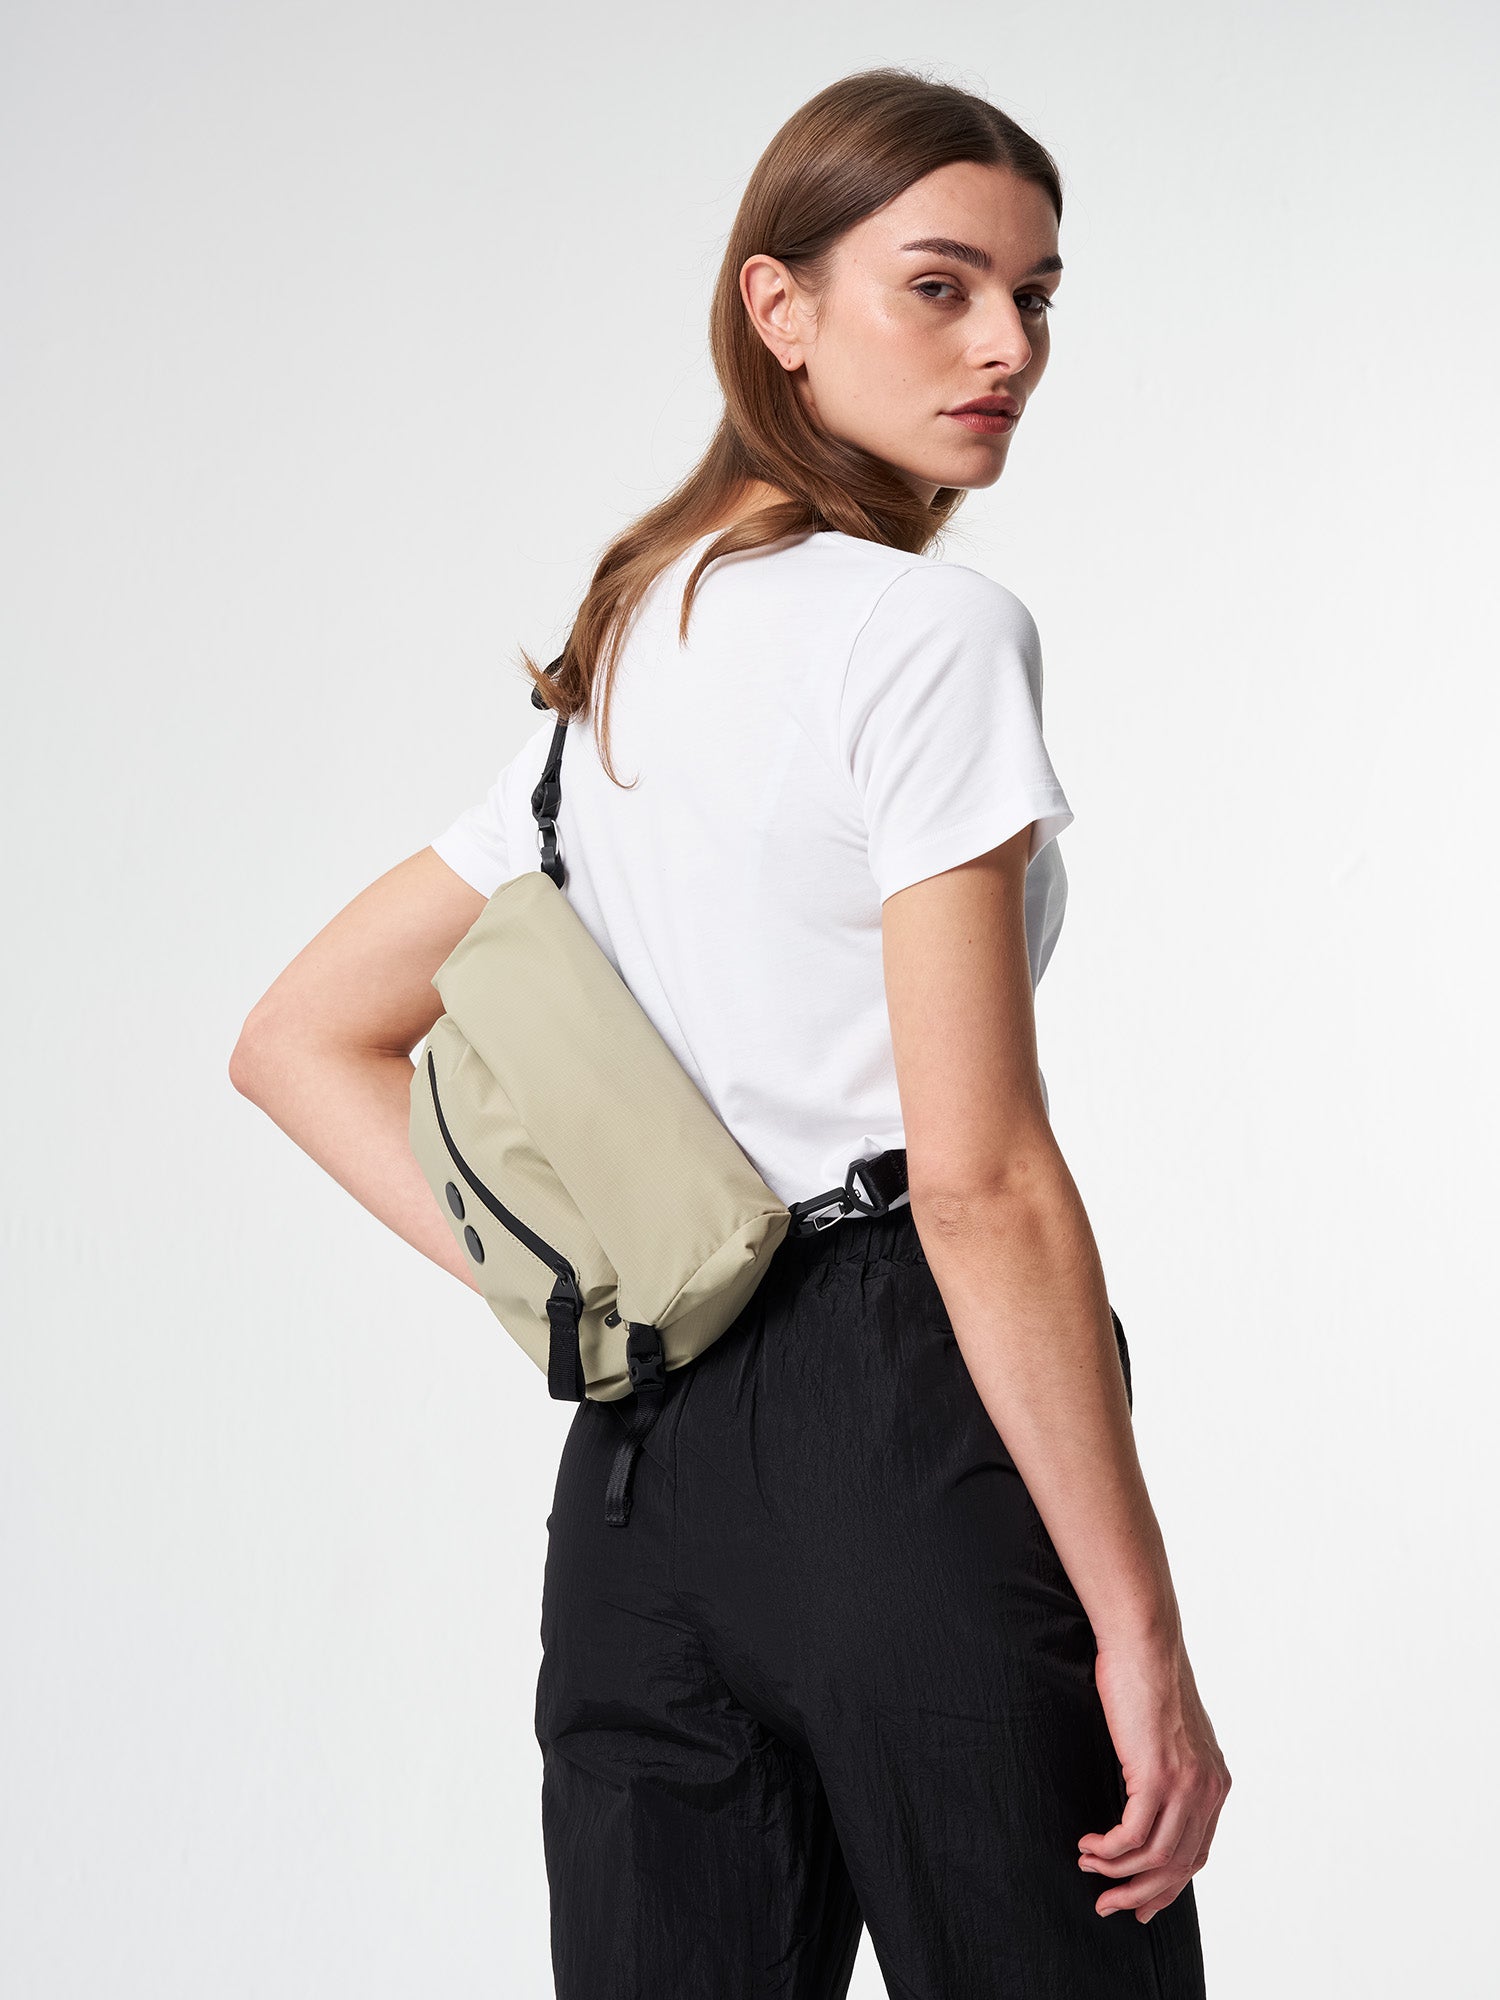 Hip pinqponq Versatile, sustainable ✓ and – durable, Bag: Aksel